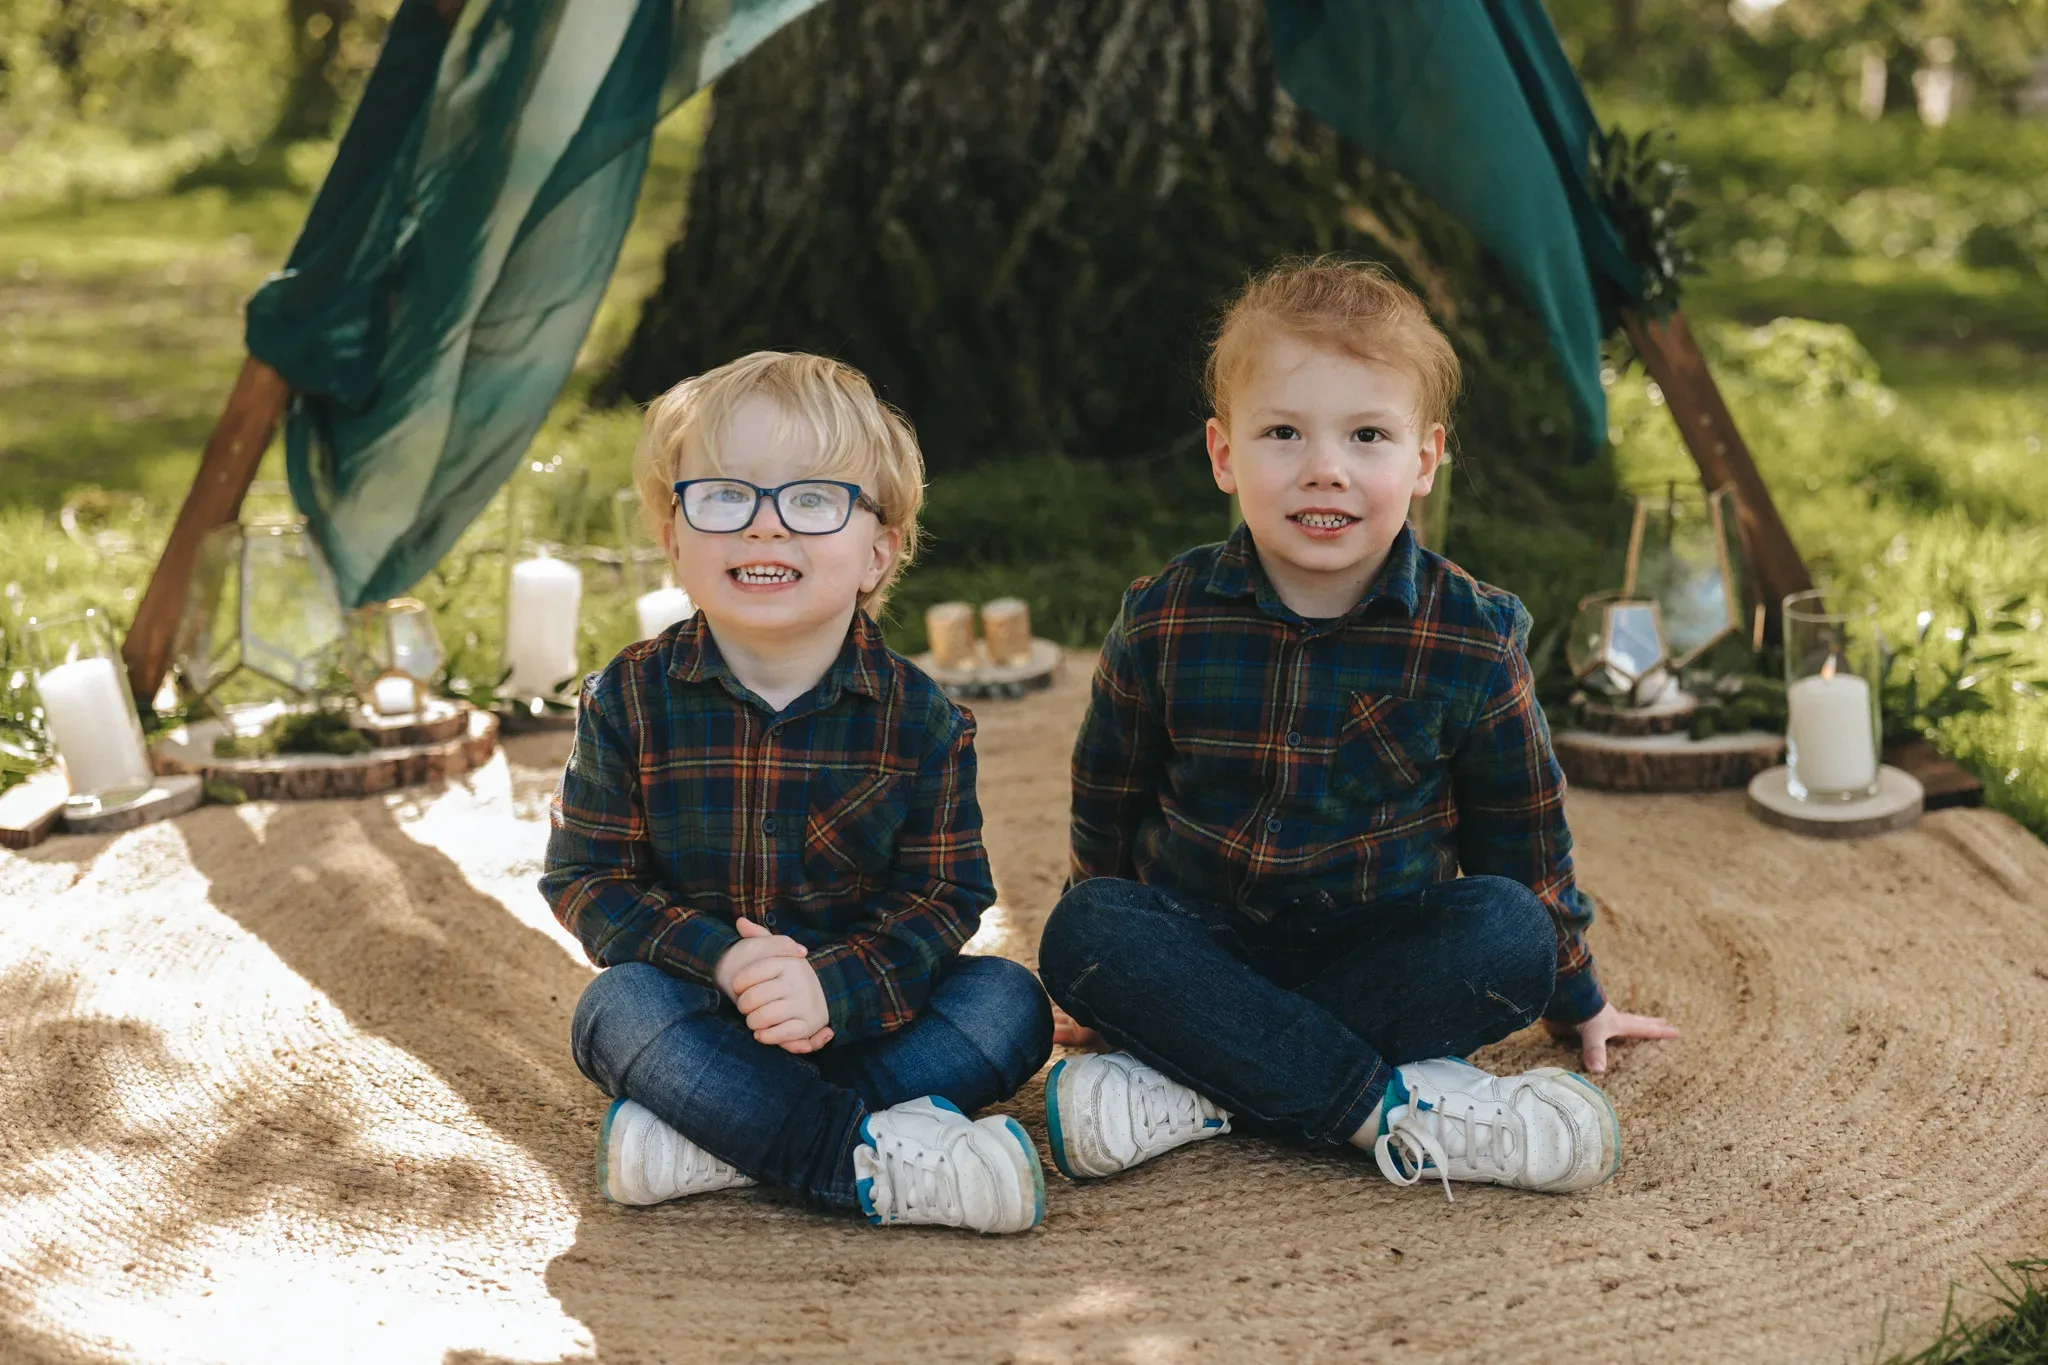 Two young boys wearing plaid shirts and jeans sit on a blanket in a park under a tent made of green fabric draped over a tree. the setting includes grass with scattered candles around them, conveying a cozy outdoor atmosphere.